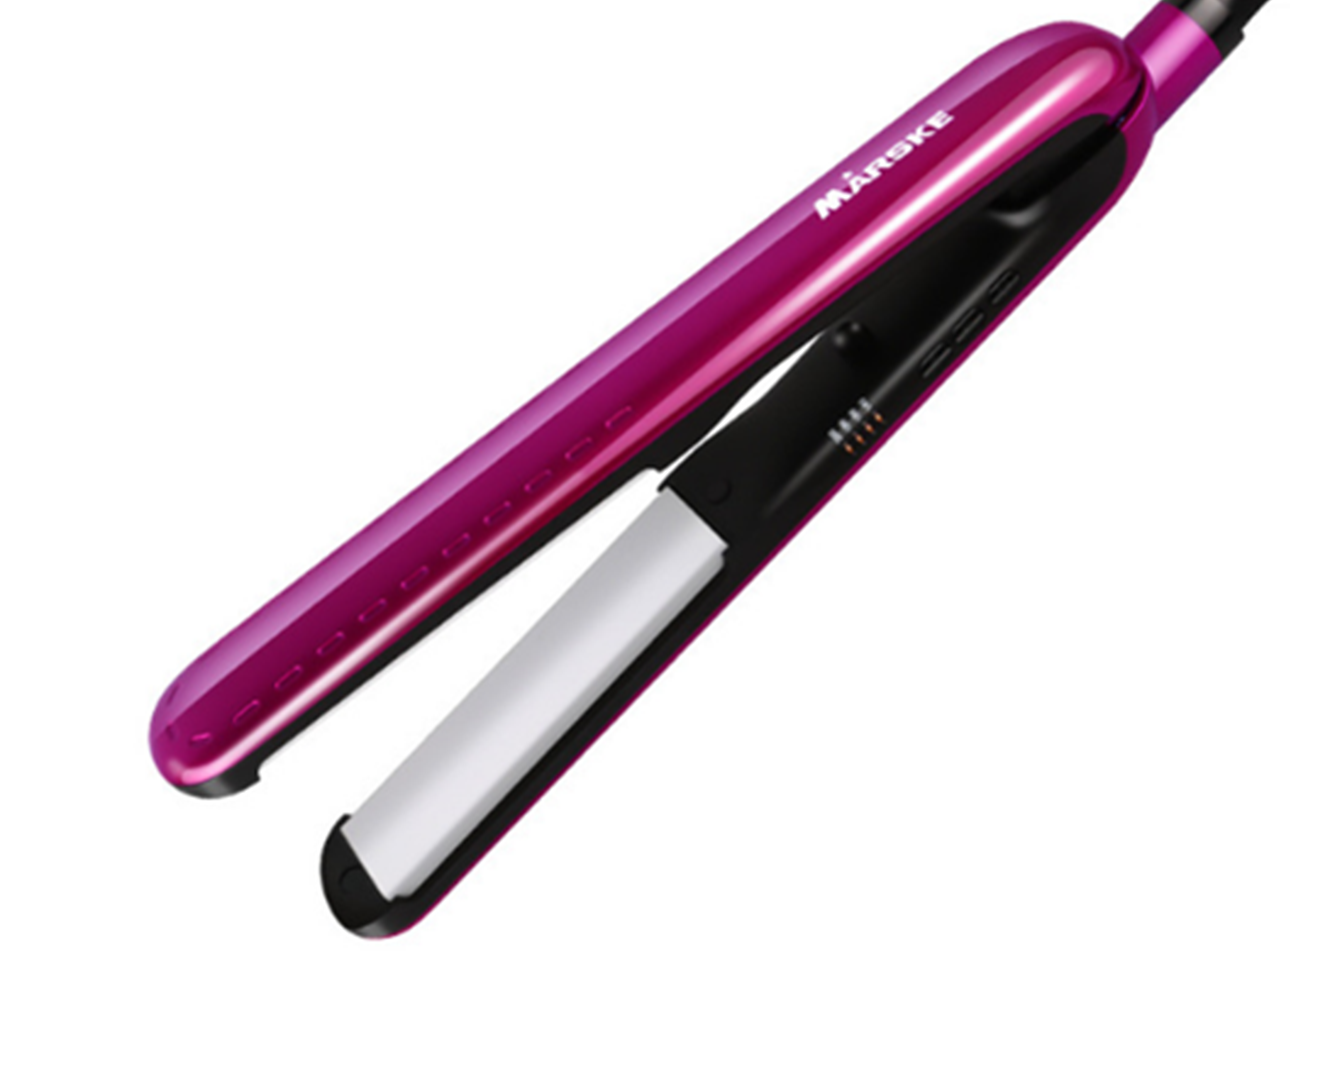 Straight Hair Curler Straight Hair 2 In 1 Electric Plywood Ceramic Household Temperature Adjustment Straightening Hot Hot-Purple